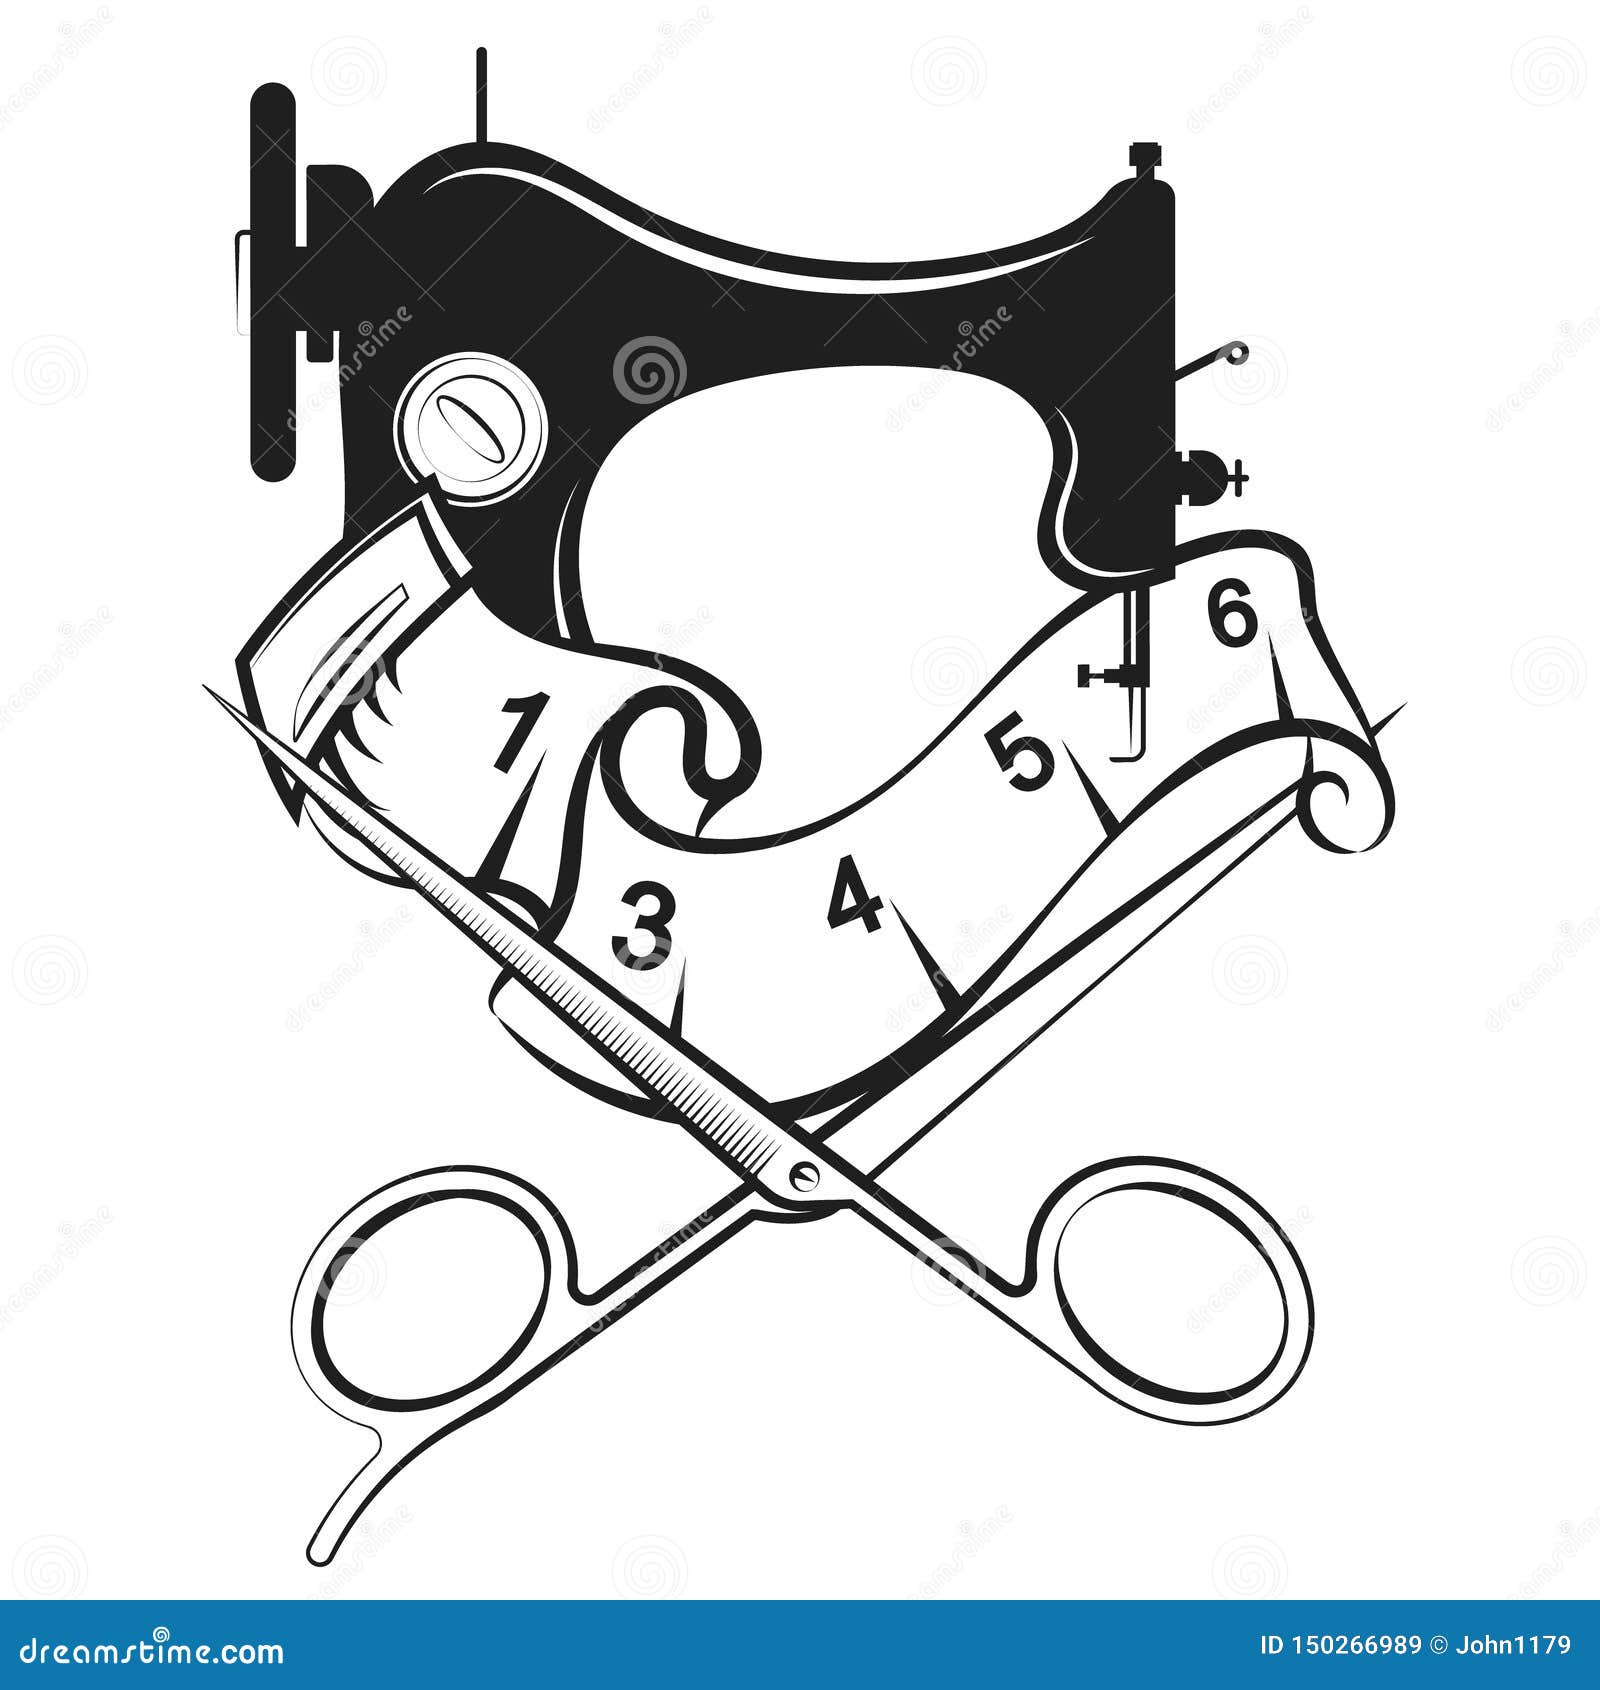 Cutting and Sewing Silhouette Design Stock Illustration - Illustration ...